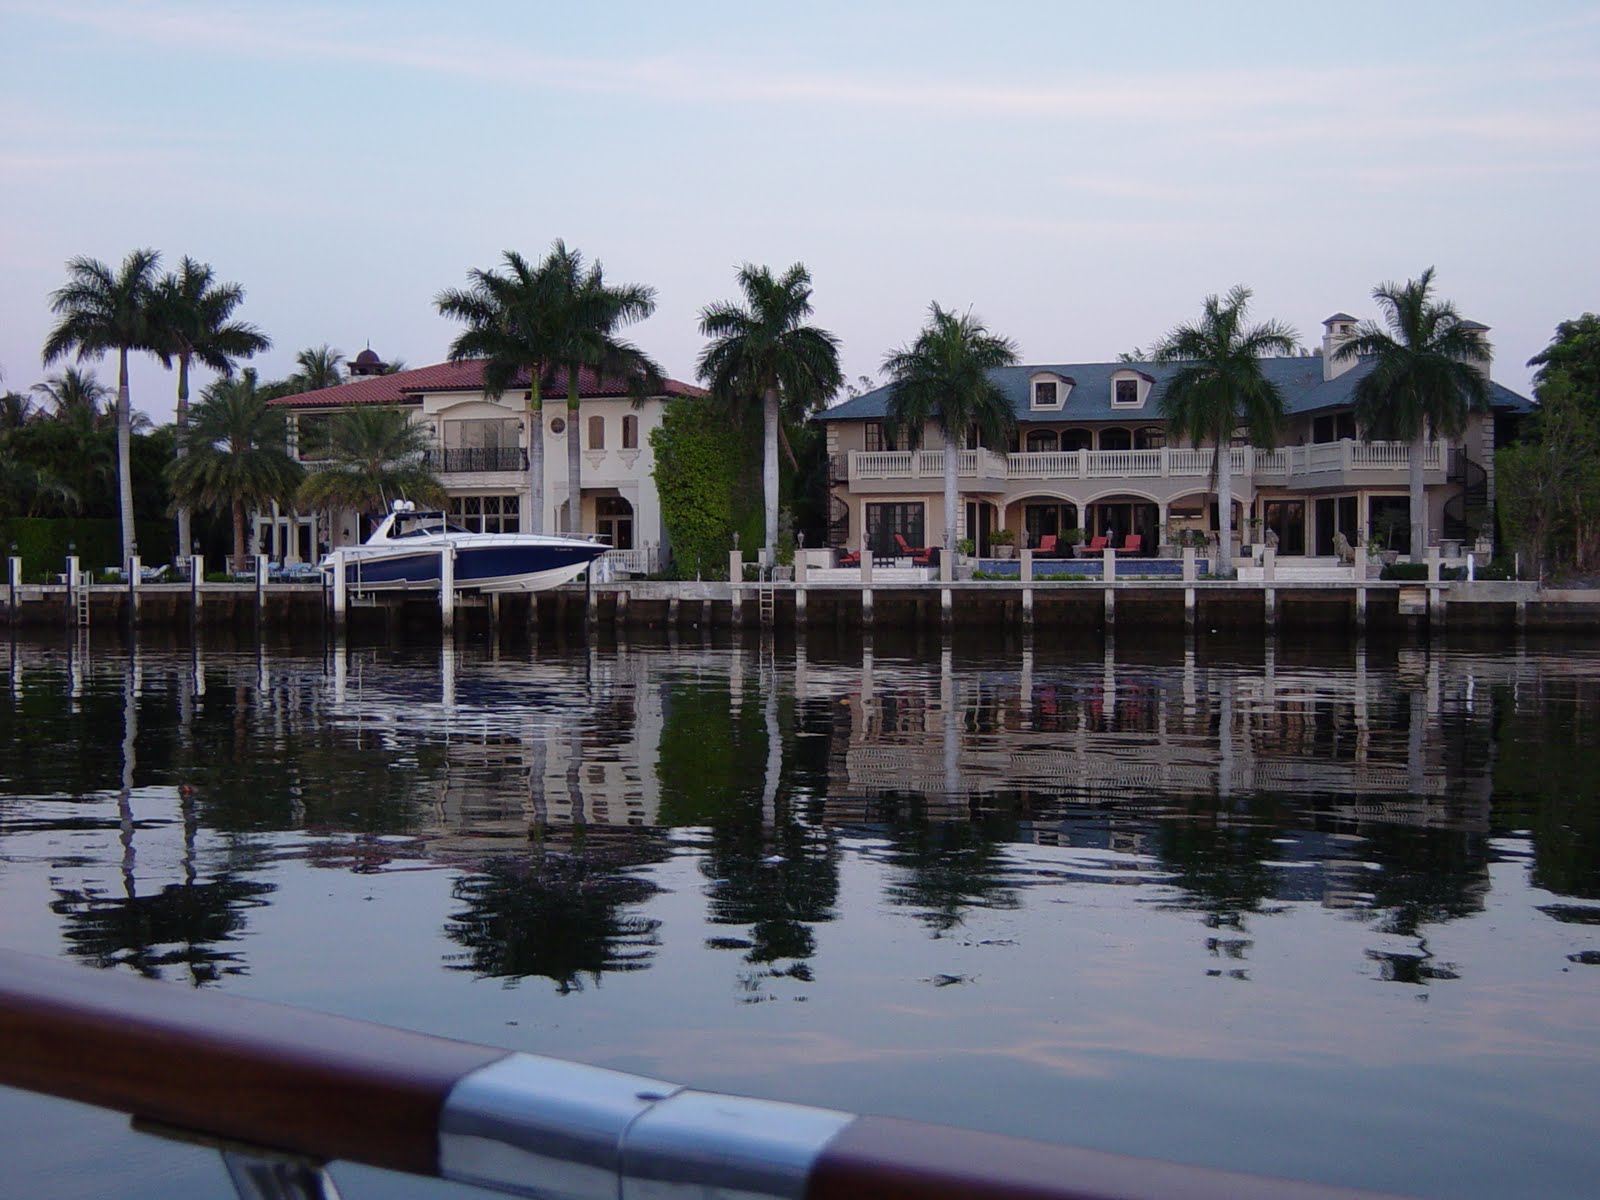 [Coral+Gables+to+Ft+Lauderdale+023.JPG]